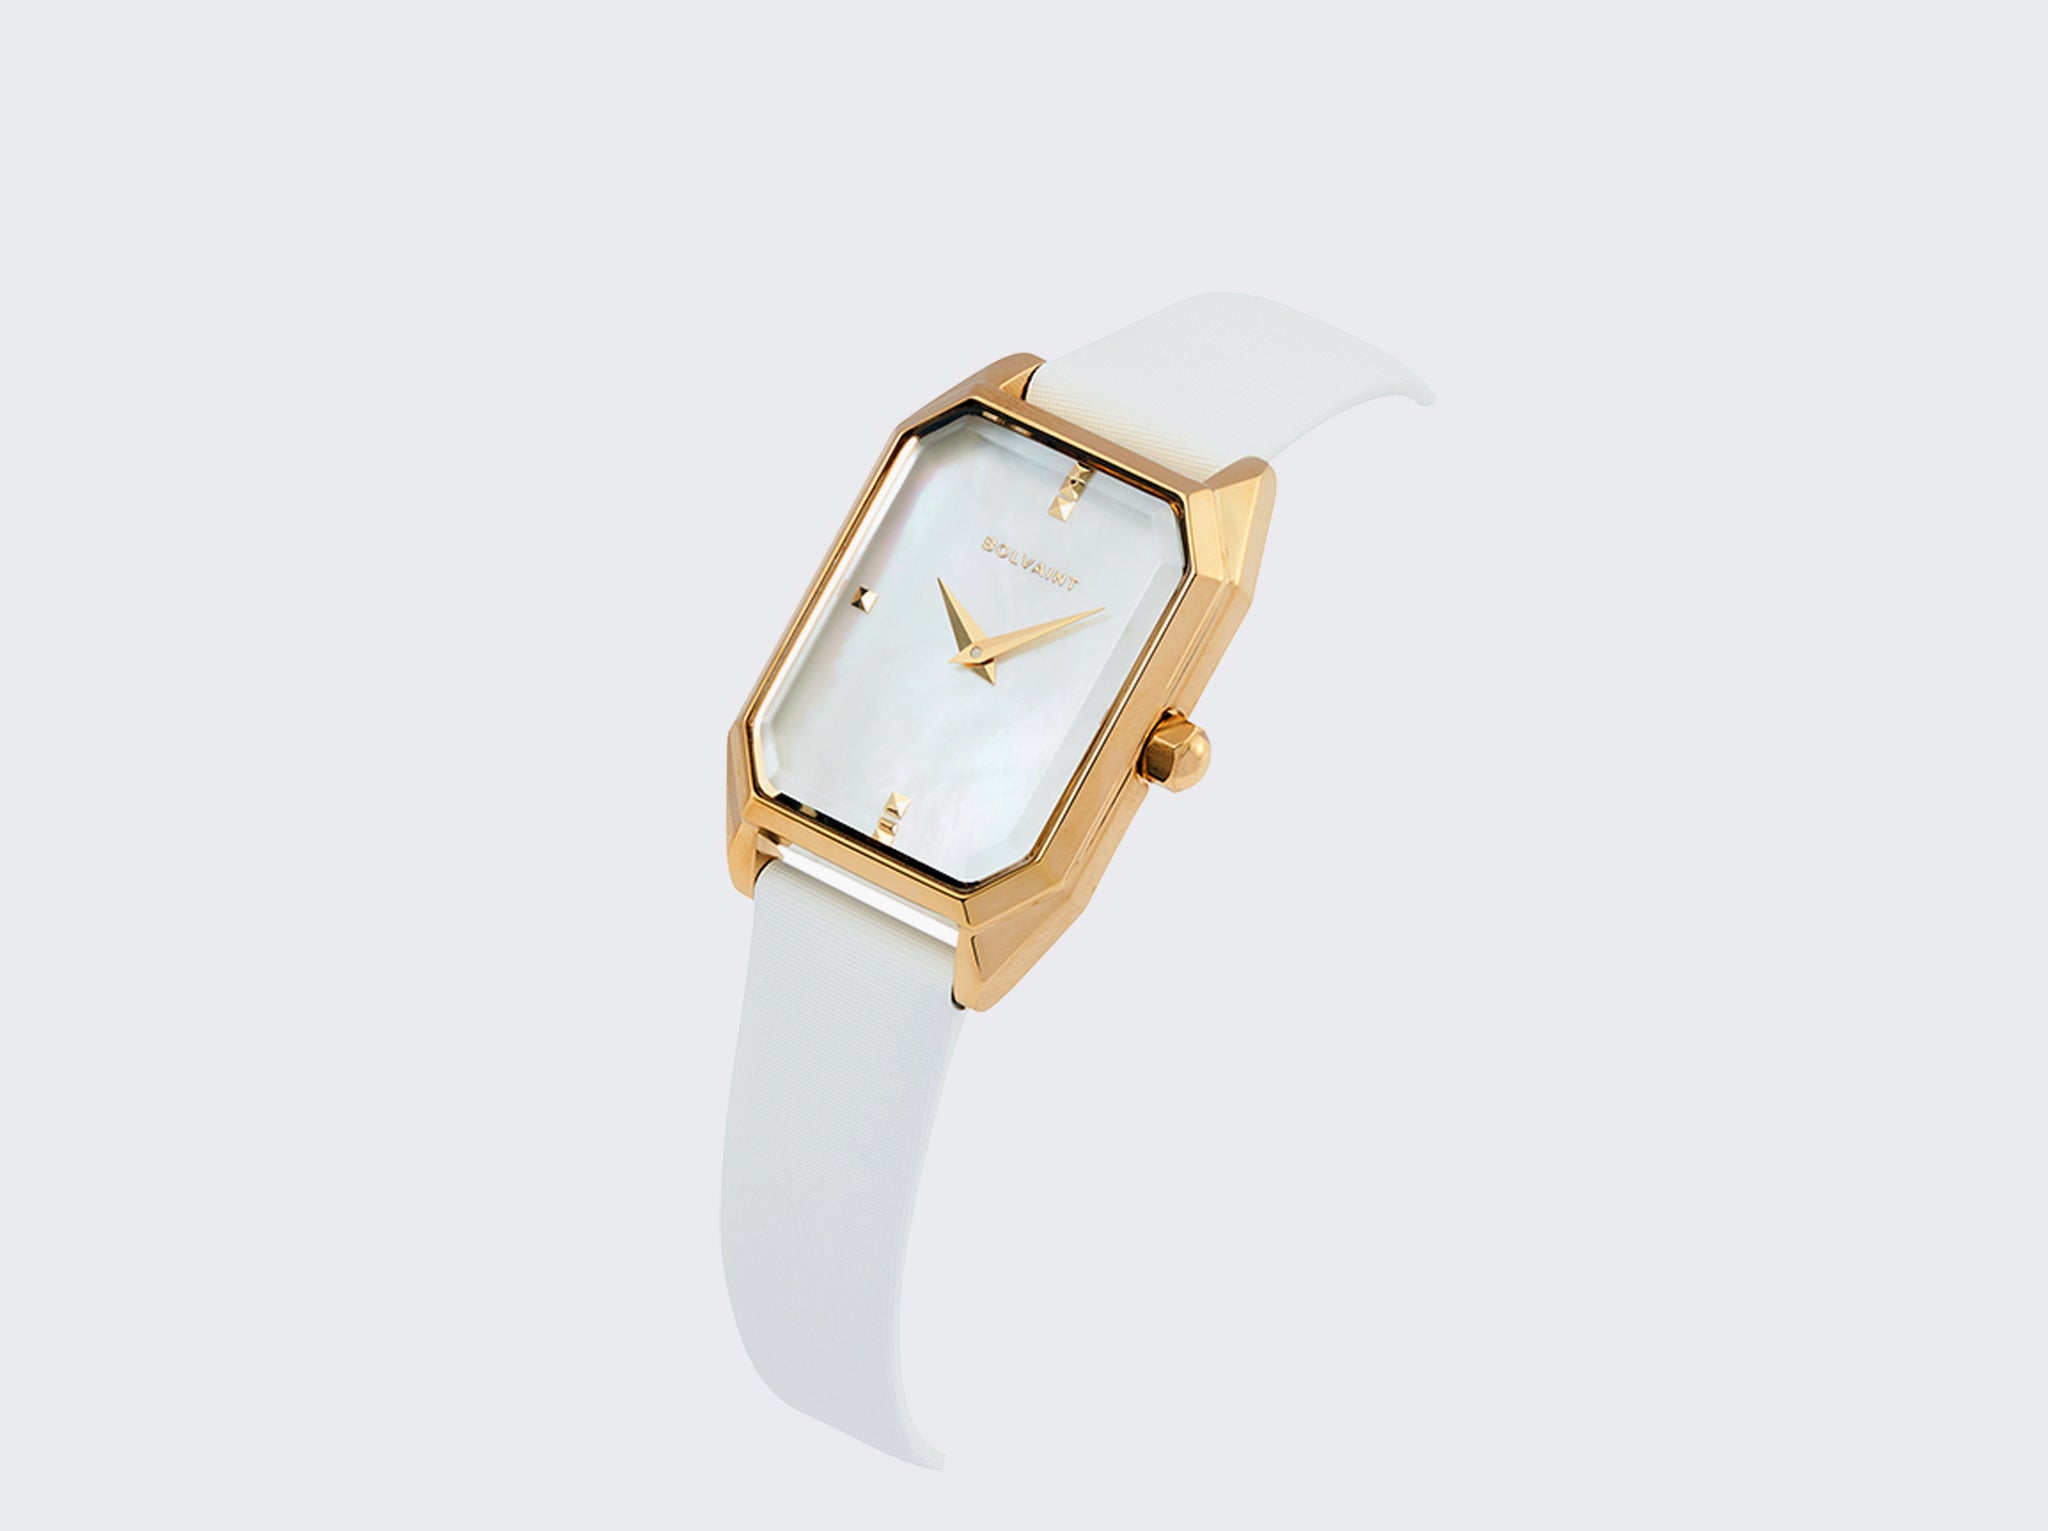 The Artemis Mother-of-Pearl Ladies Watch, Gold and Ayoka White